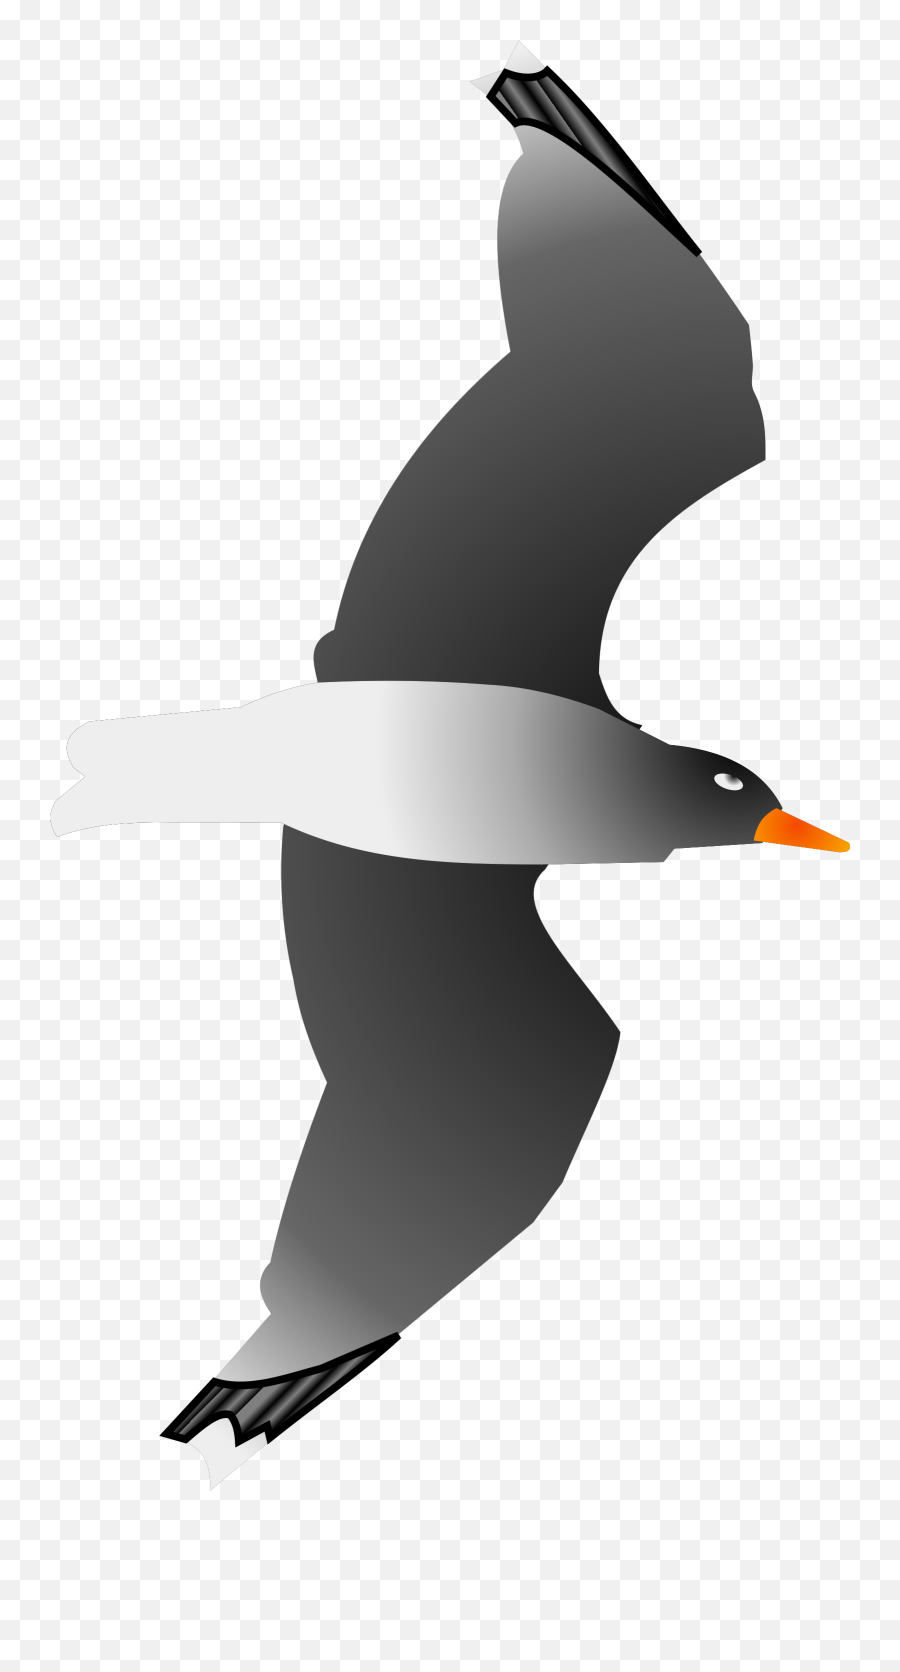 Seagull Png Svg Clip Art For Web - Seabird,Seagull Icon